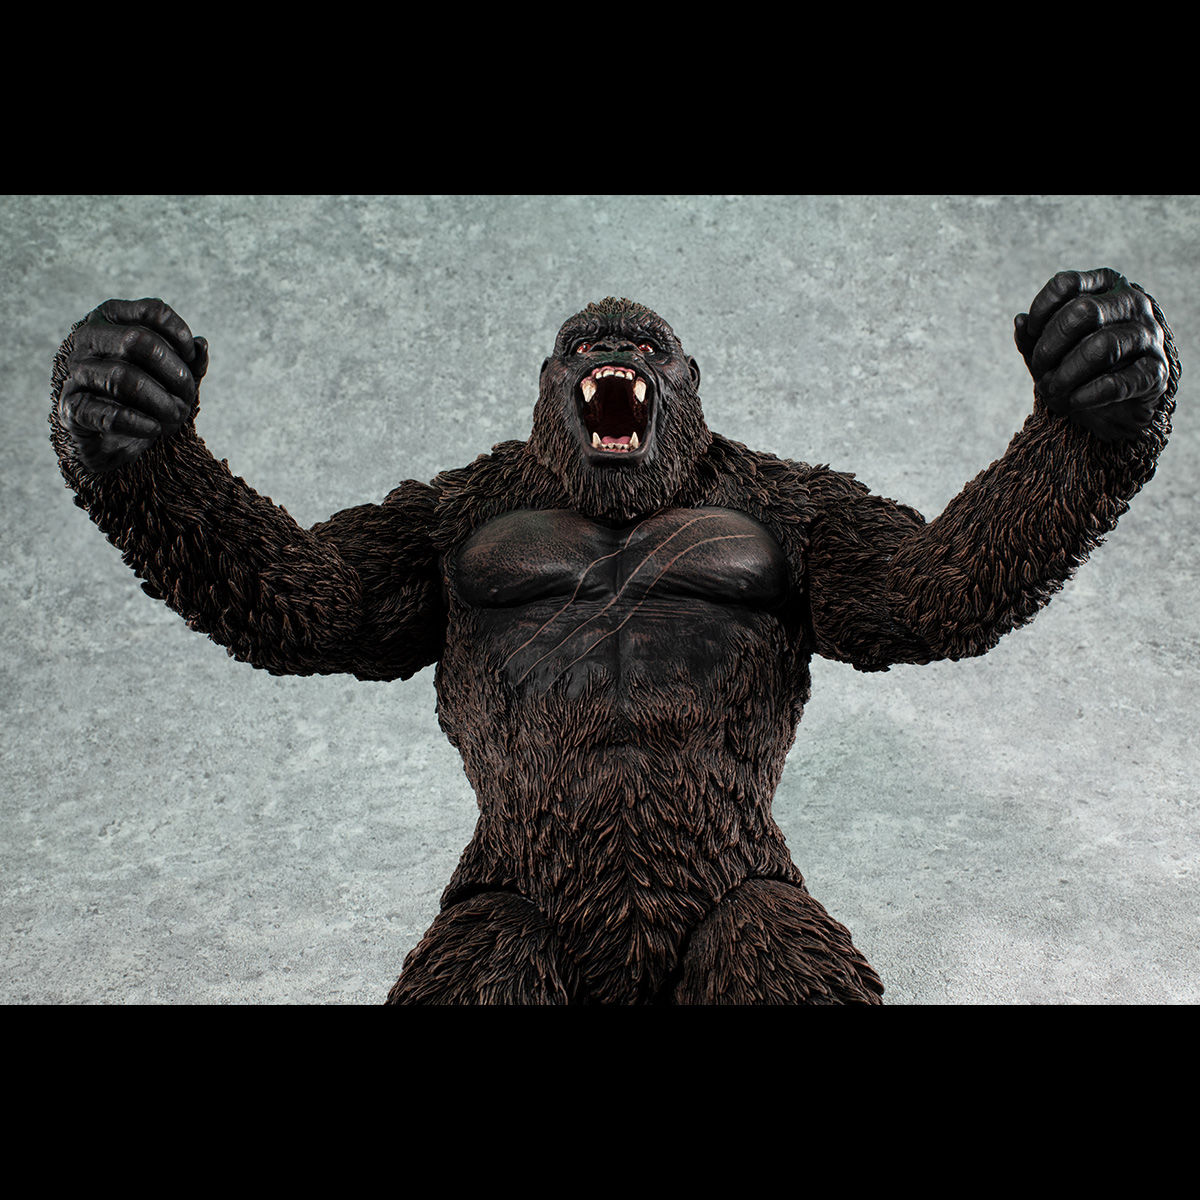 UA Monsters KONG from GODZILLAvs.KONG (2021) [Dec 2021 Delivery]